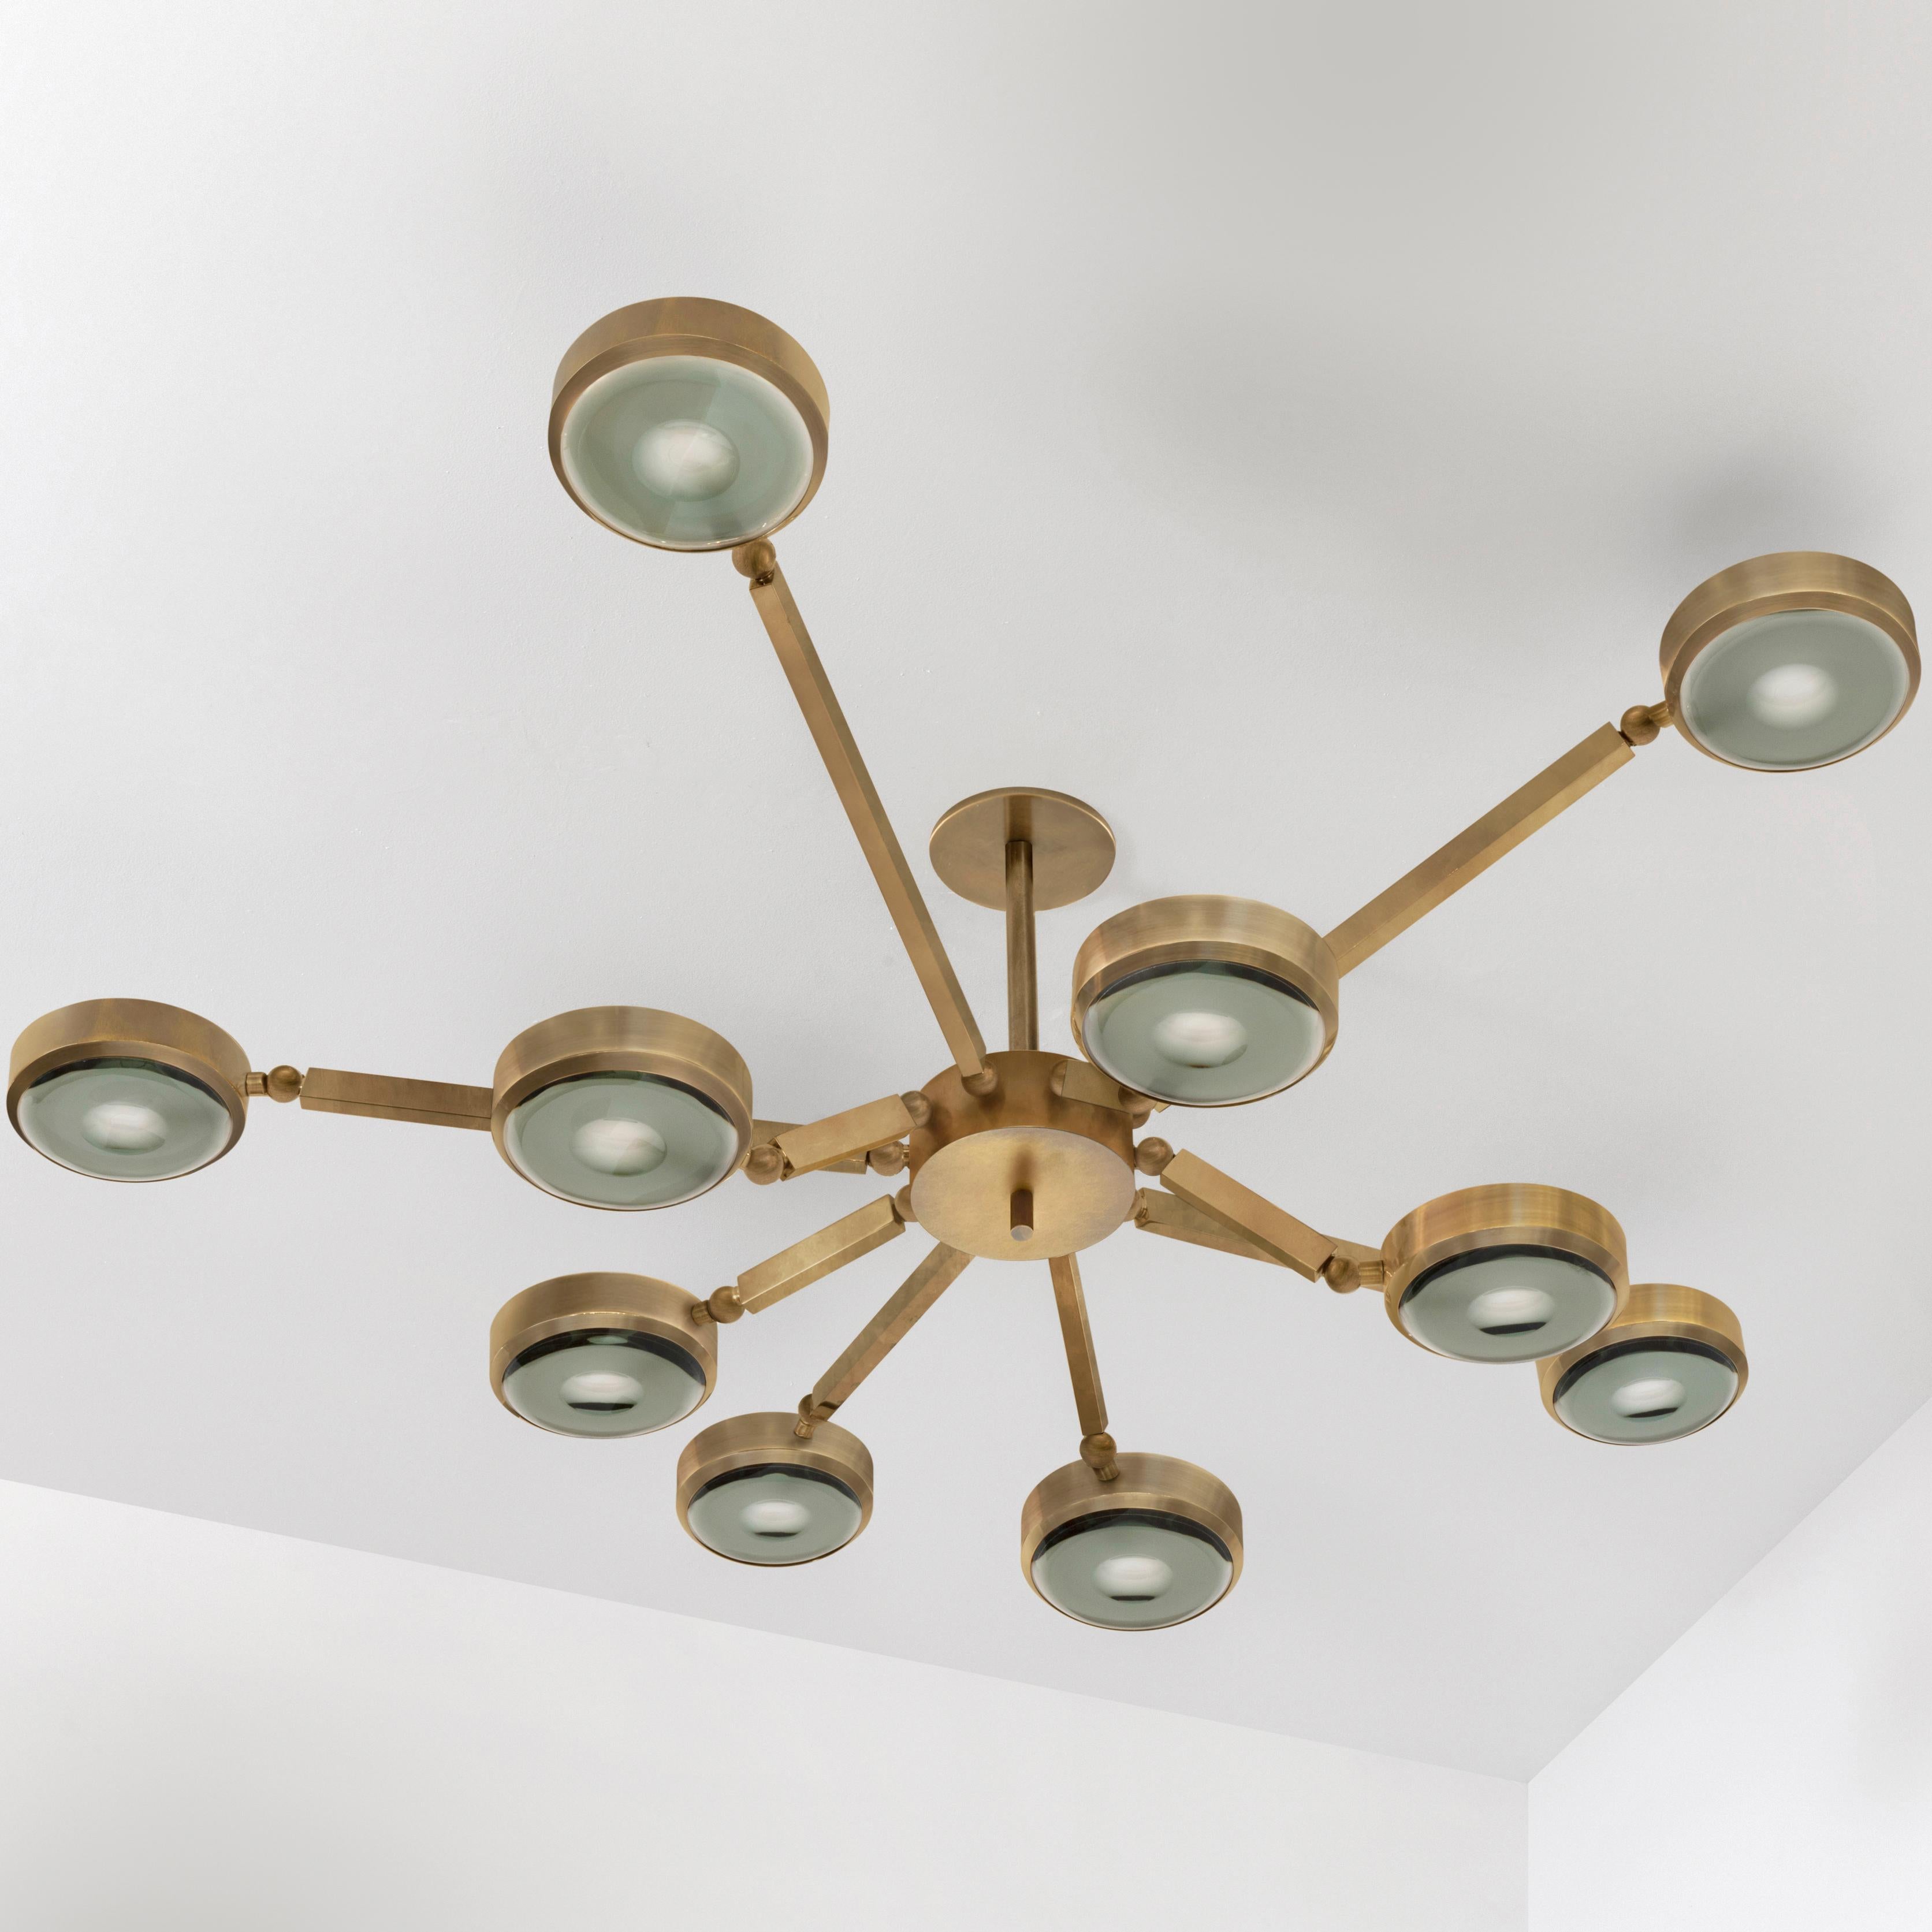 Italian Oculus Articulating Ceiling Light-Polished Nickel Finish and Carved Glass For Sale